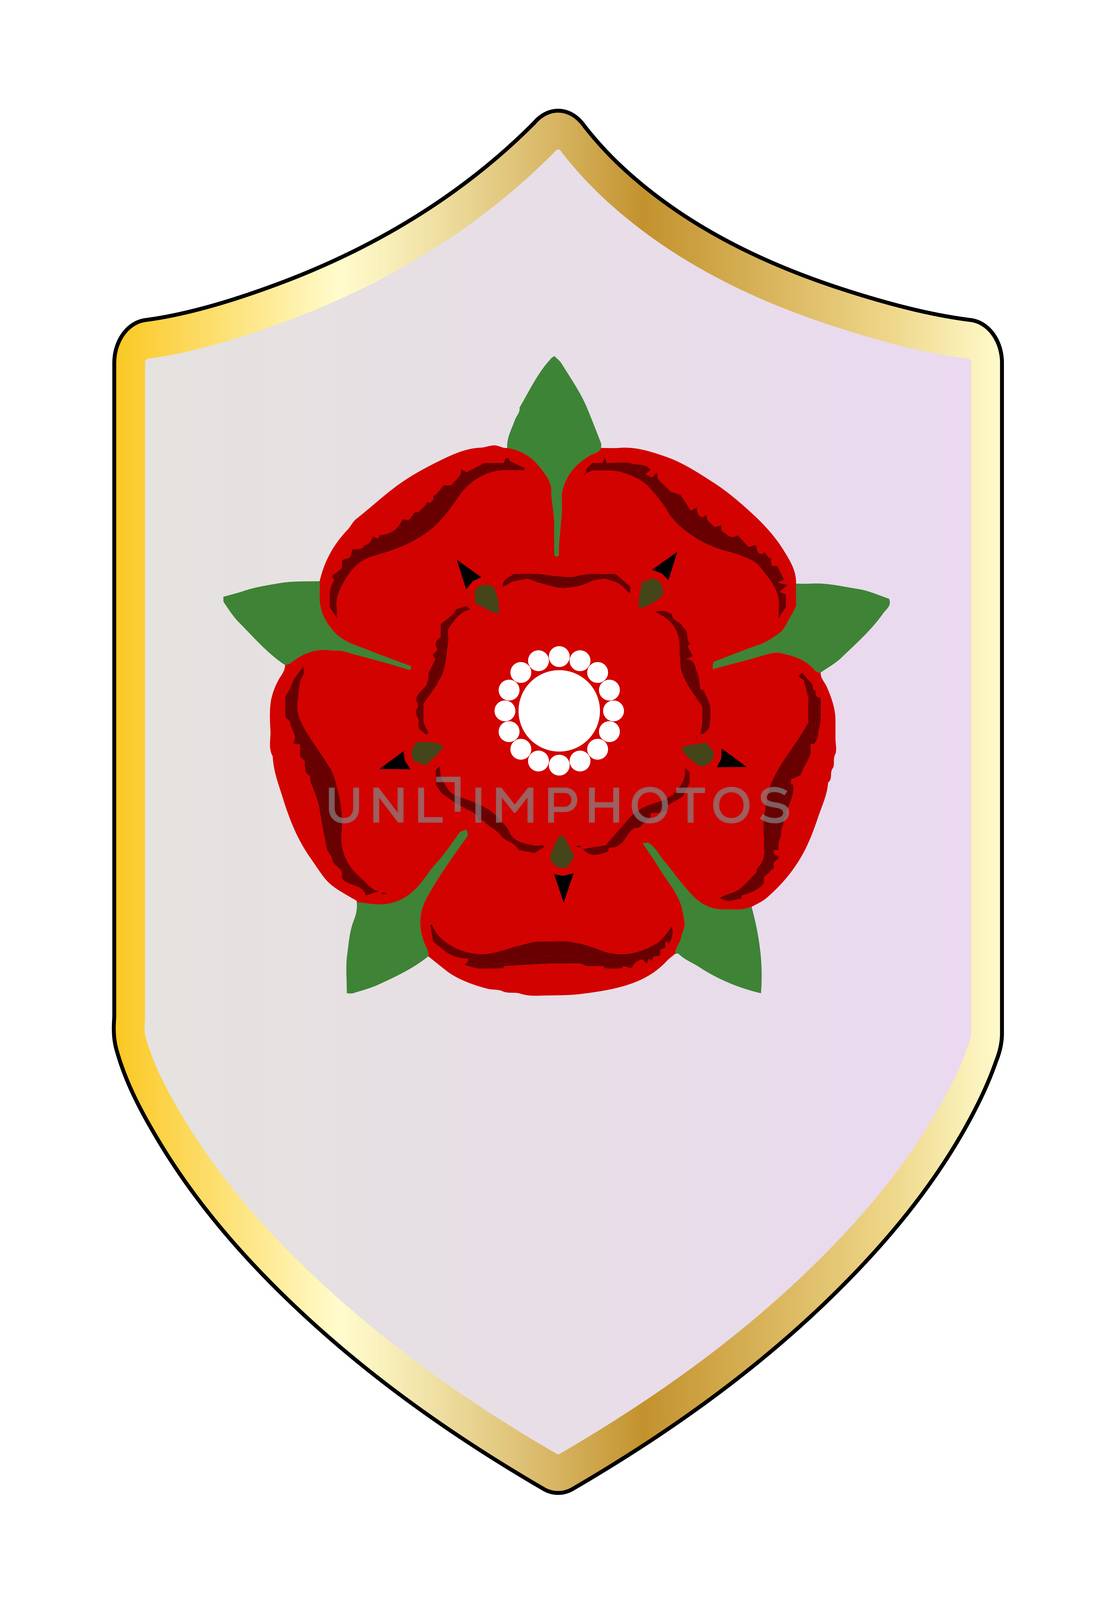 A shiled with the Lancastrian red rose emblem